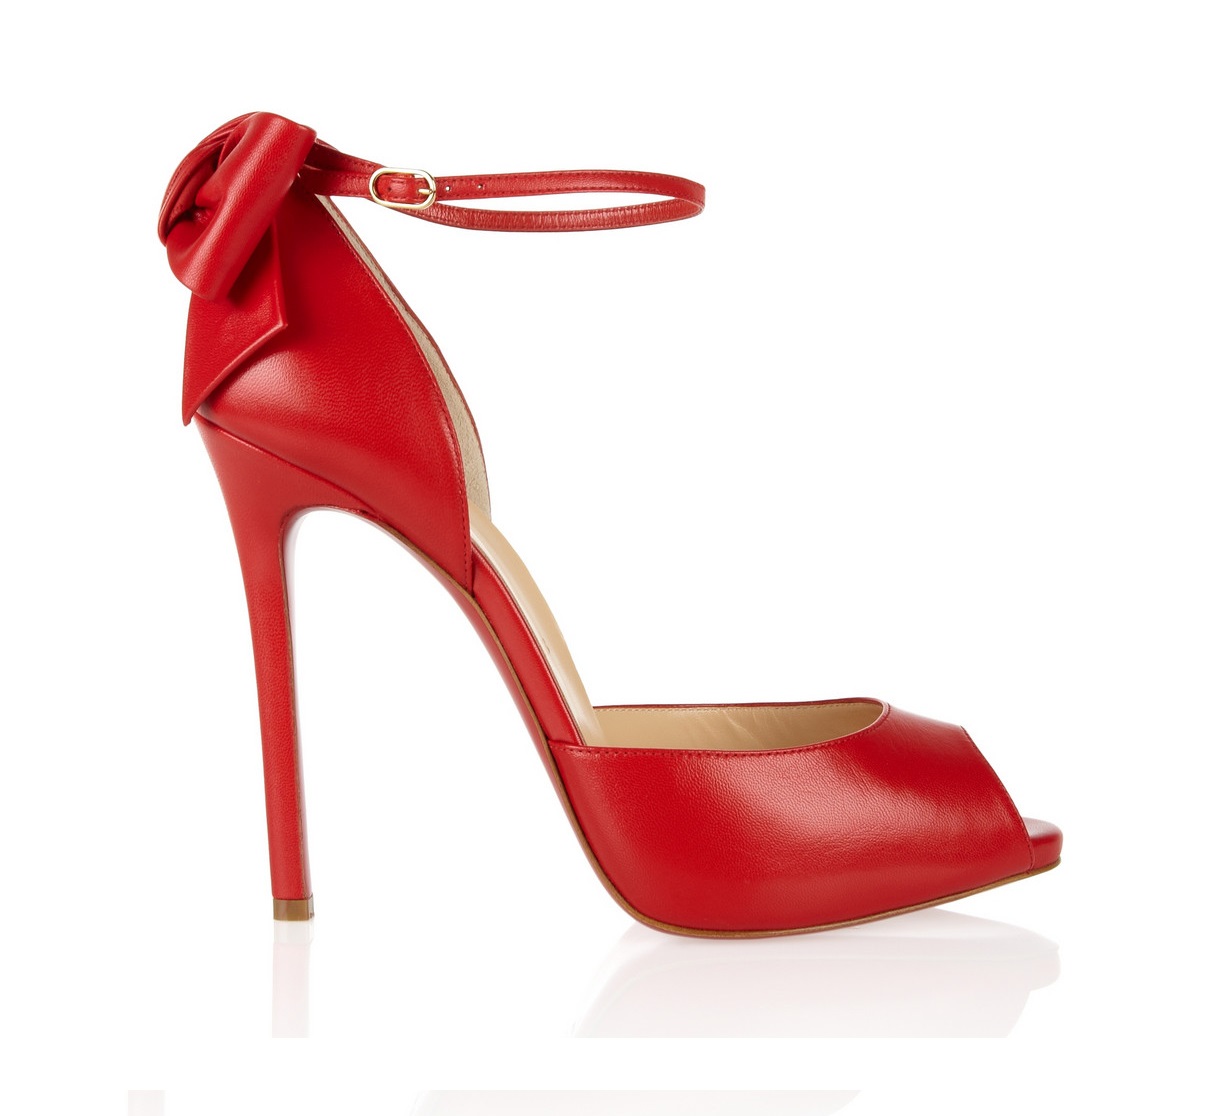 Obsession with Bows...Christian Louboutin